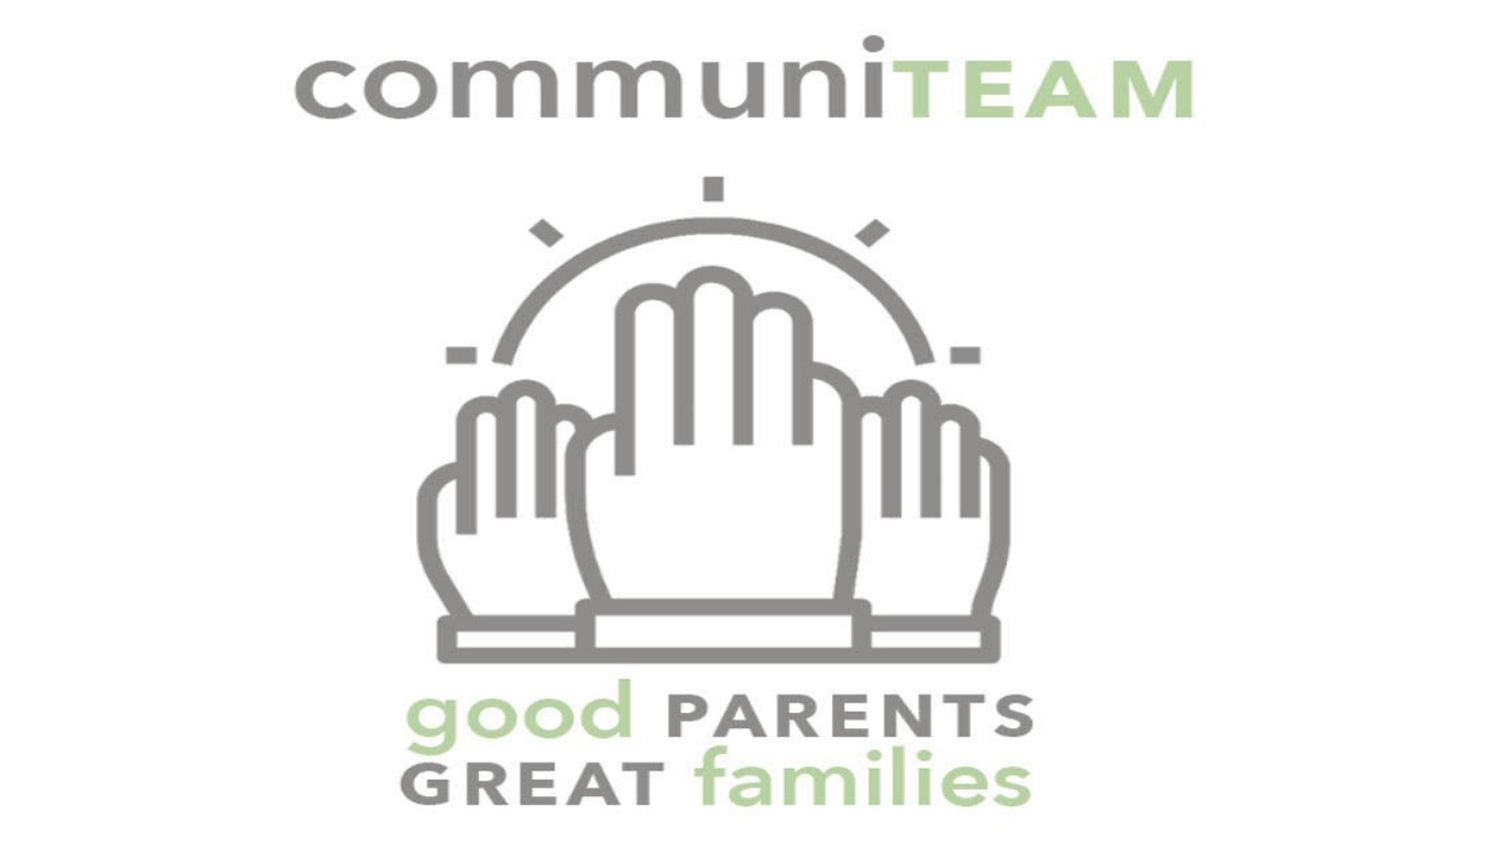 CommuniTEAM logo. communiTEAM written above three hands graphic with sun graphic above. Bottom words say good parents, great families.